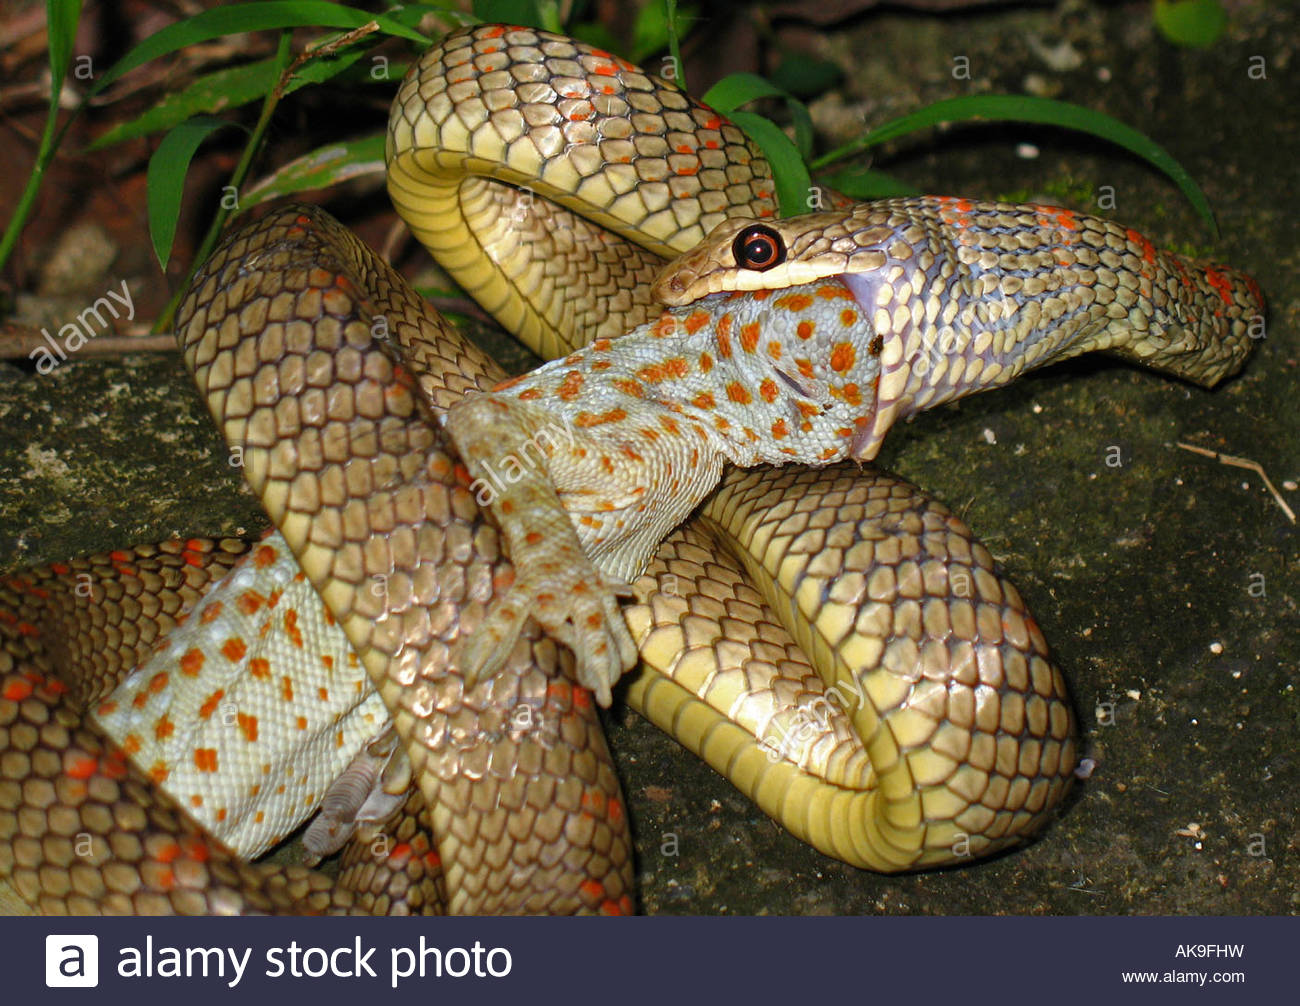 Tokay Gecko Backgrounds, Compatible - PC, Mobile, Gadgets| 1300x1006 px